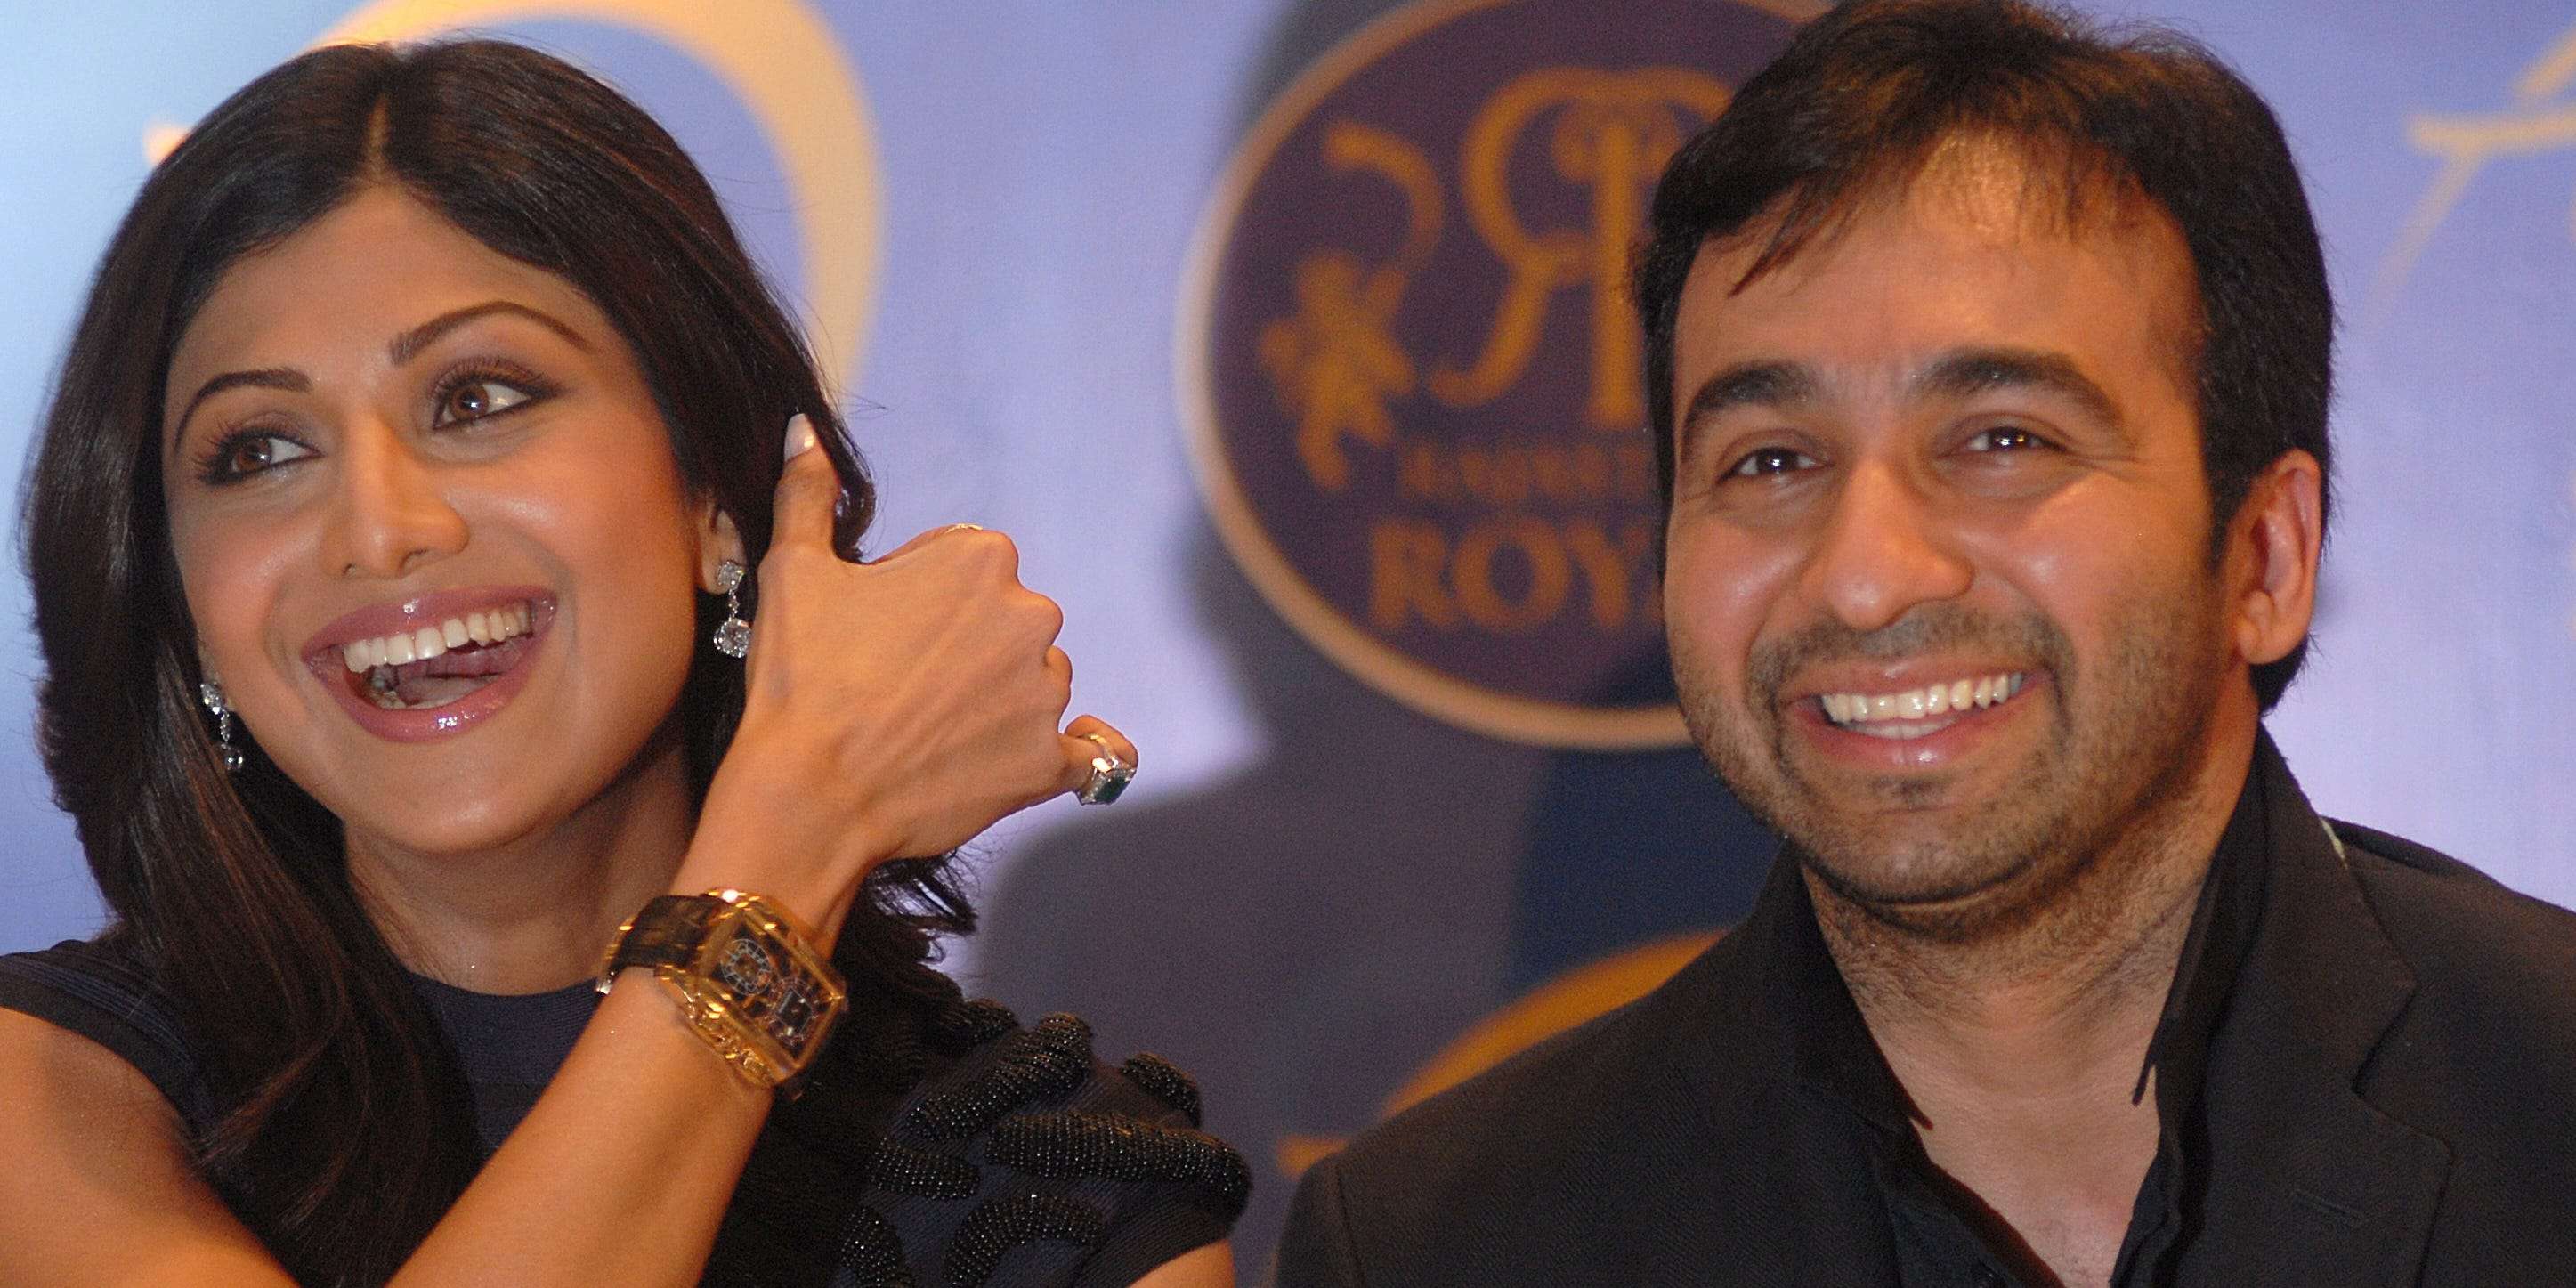 Millionaire married to Bollywood star is investigated for involvement in porn ring that coerced women into sex videos Business Insider India photo